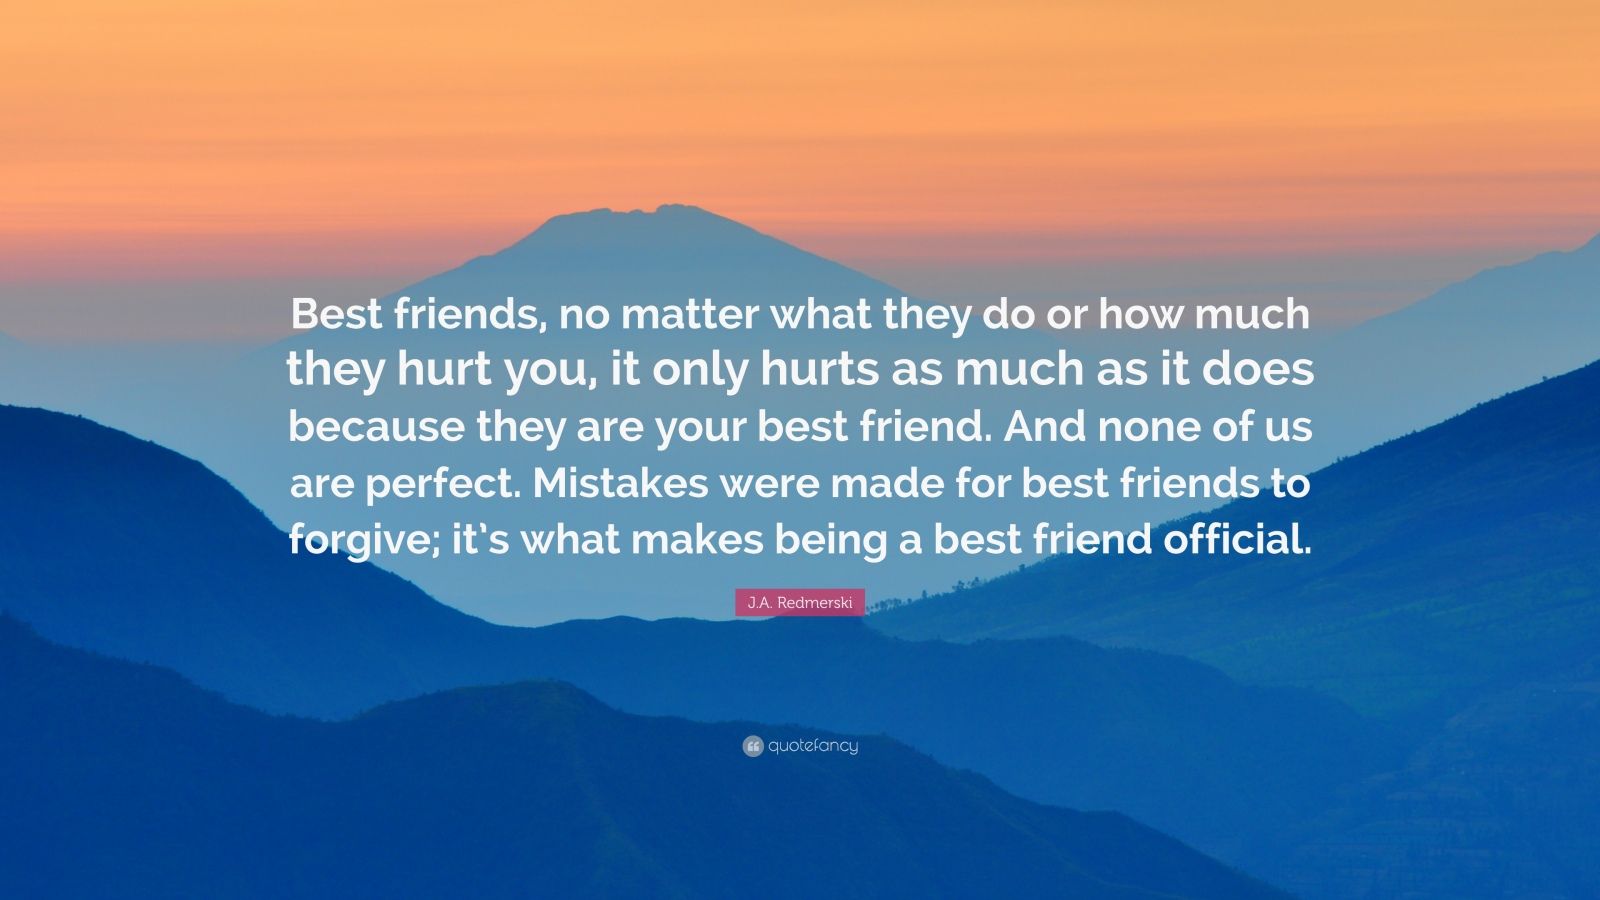 J.A. Redmerski Quote: “Best friends, no matter what they do or how much they hurt you, it only hurts as much as it does because they are your b.”